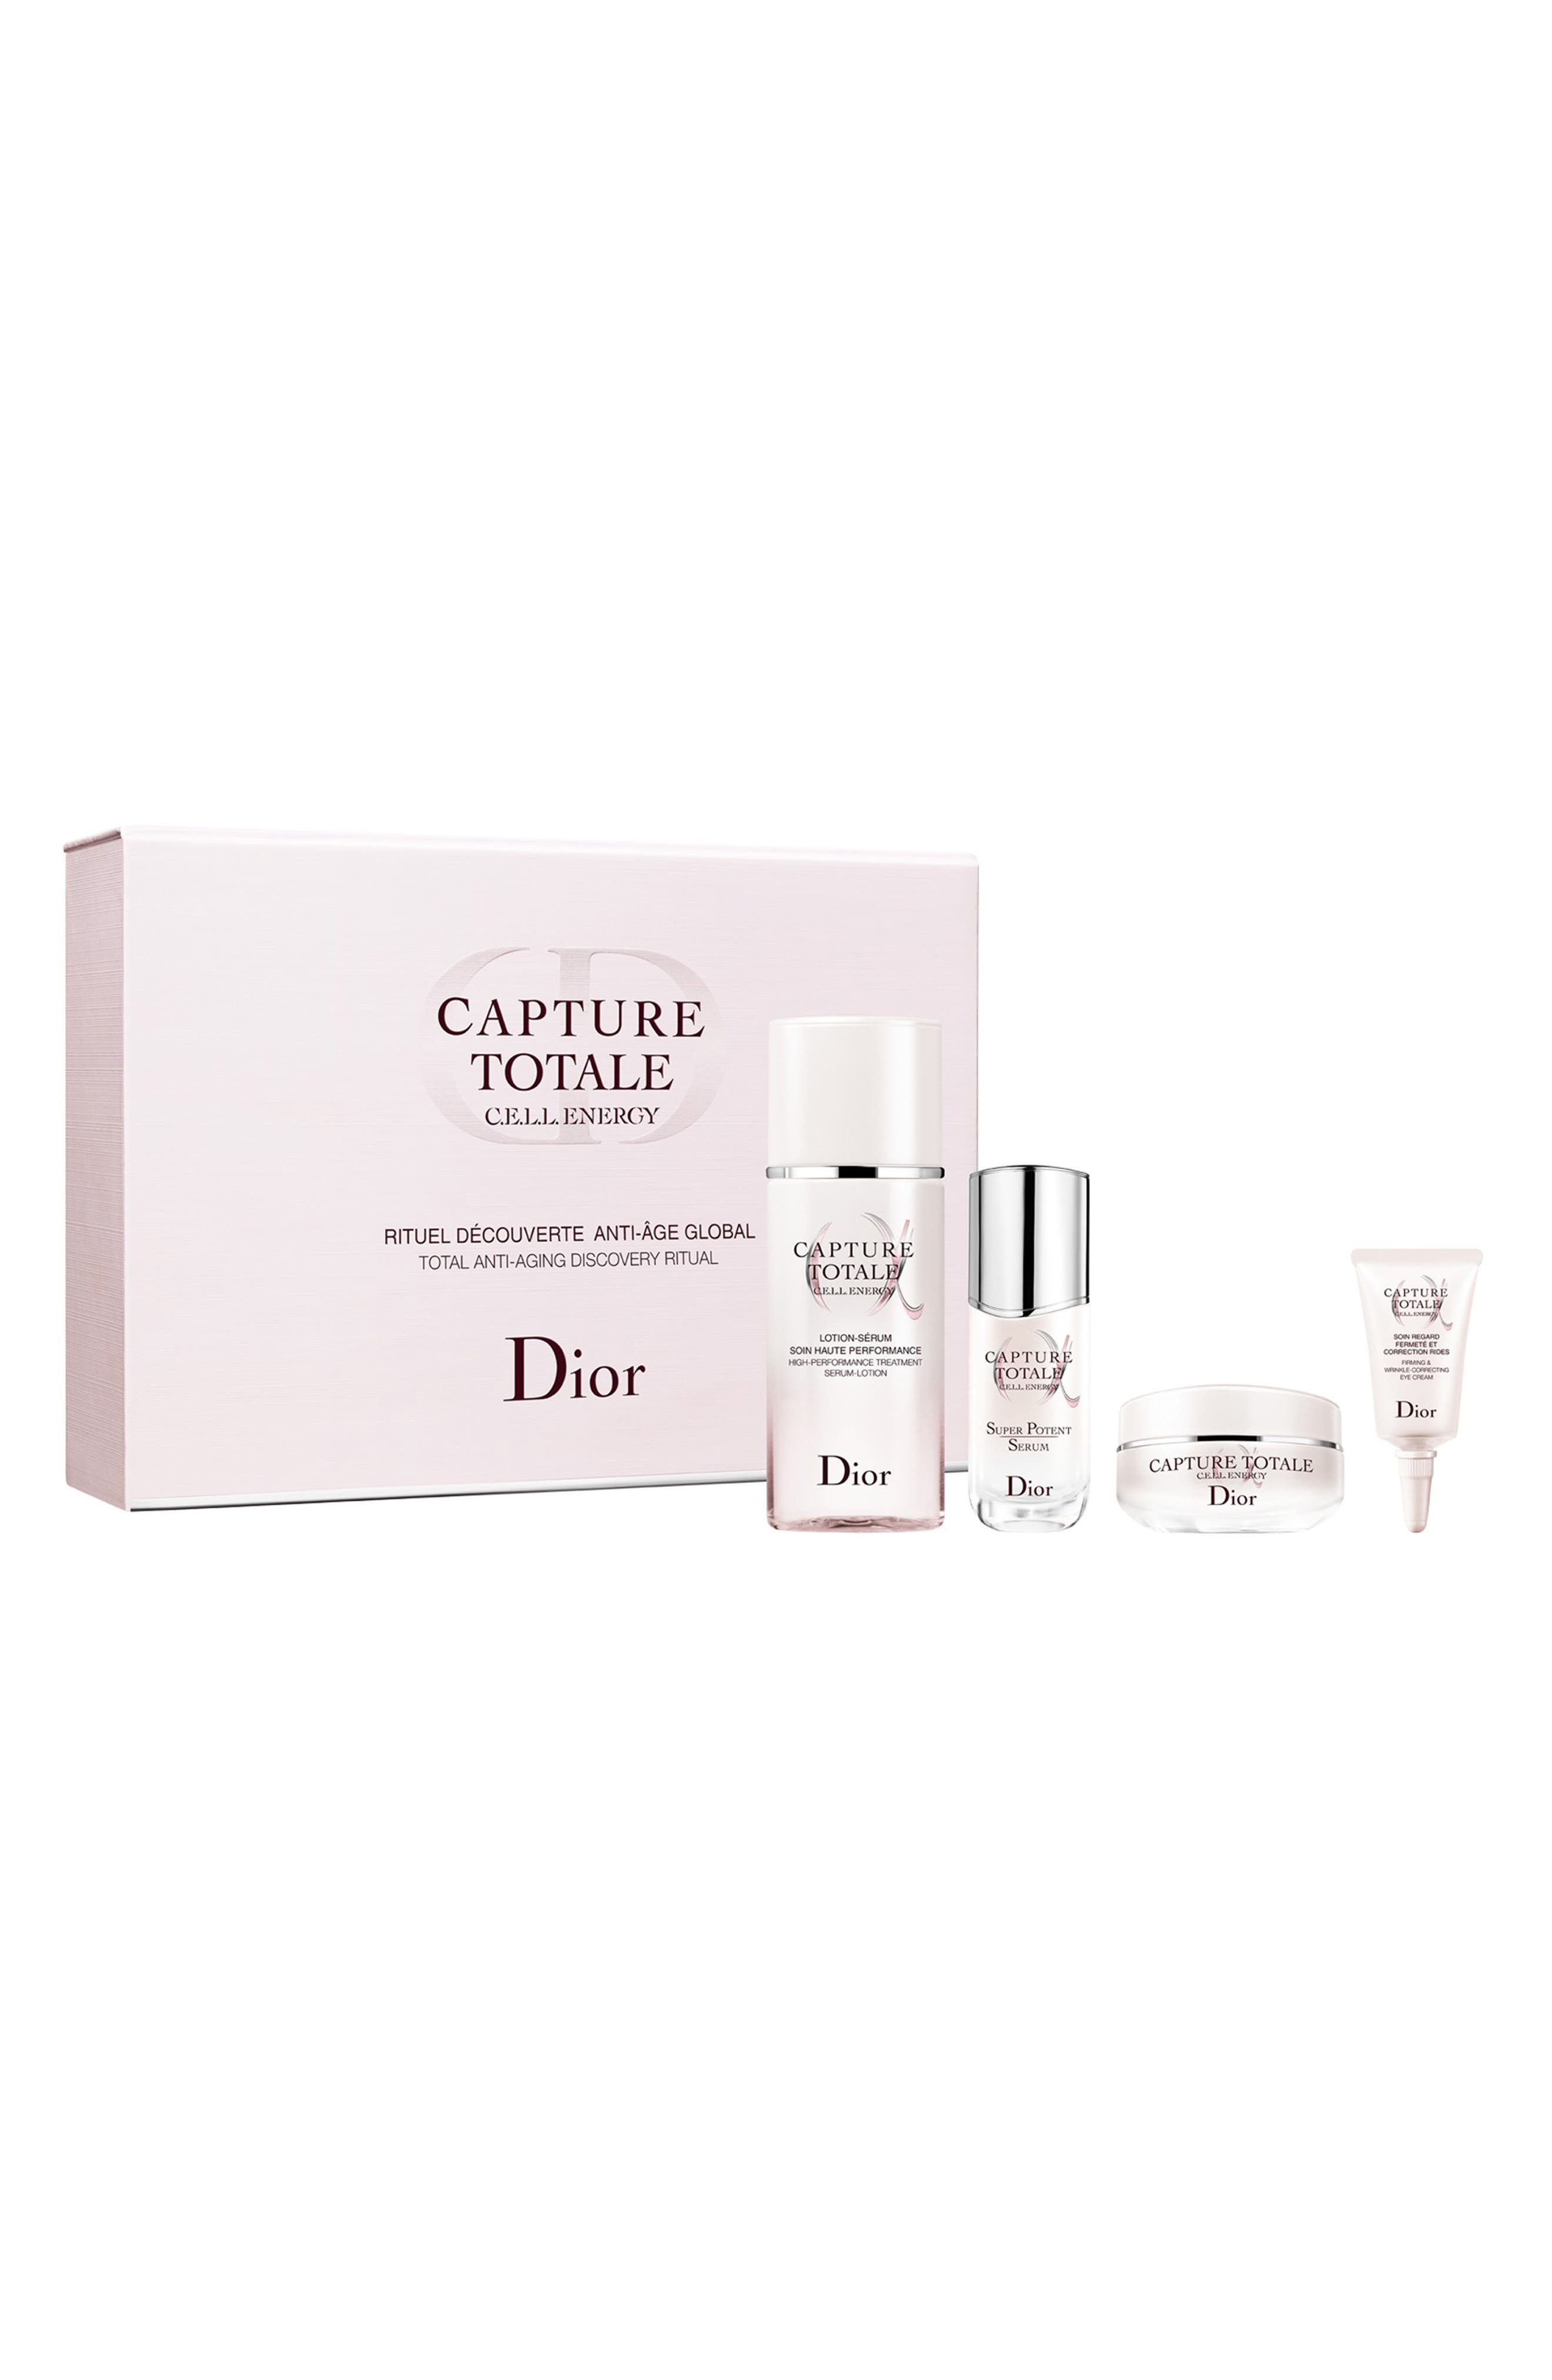 Dior Capture Totale Discovery Set ($106 